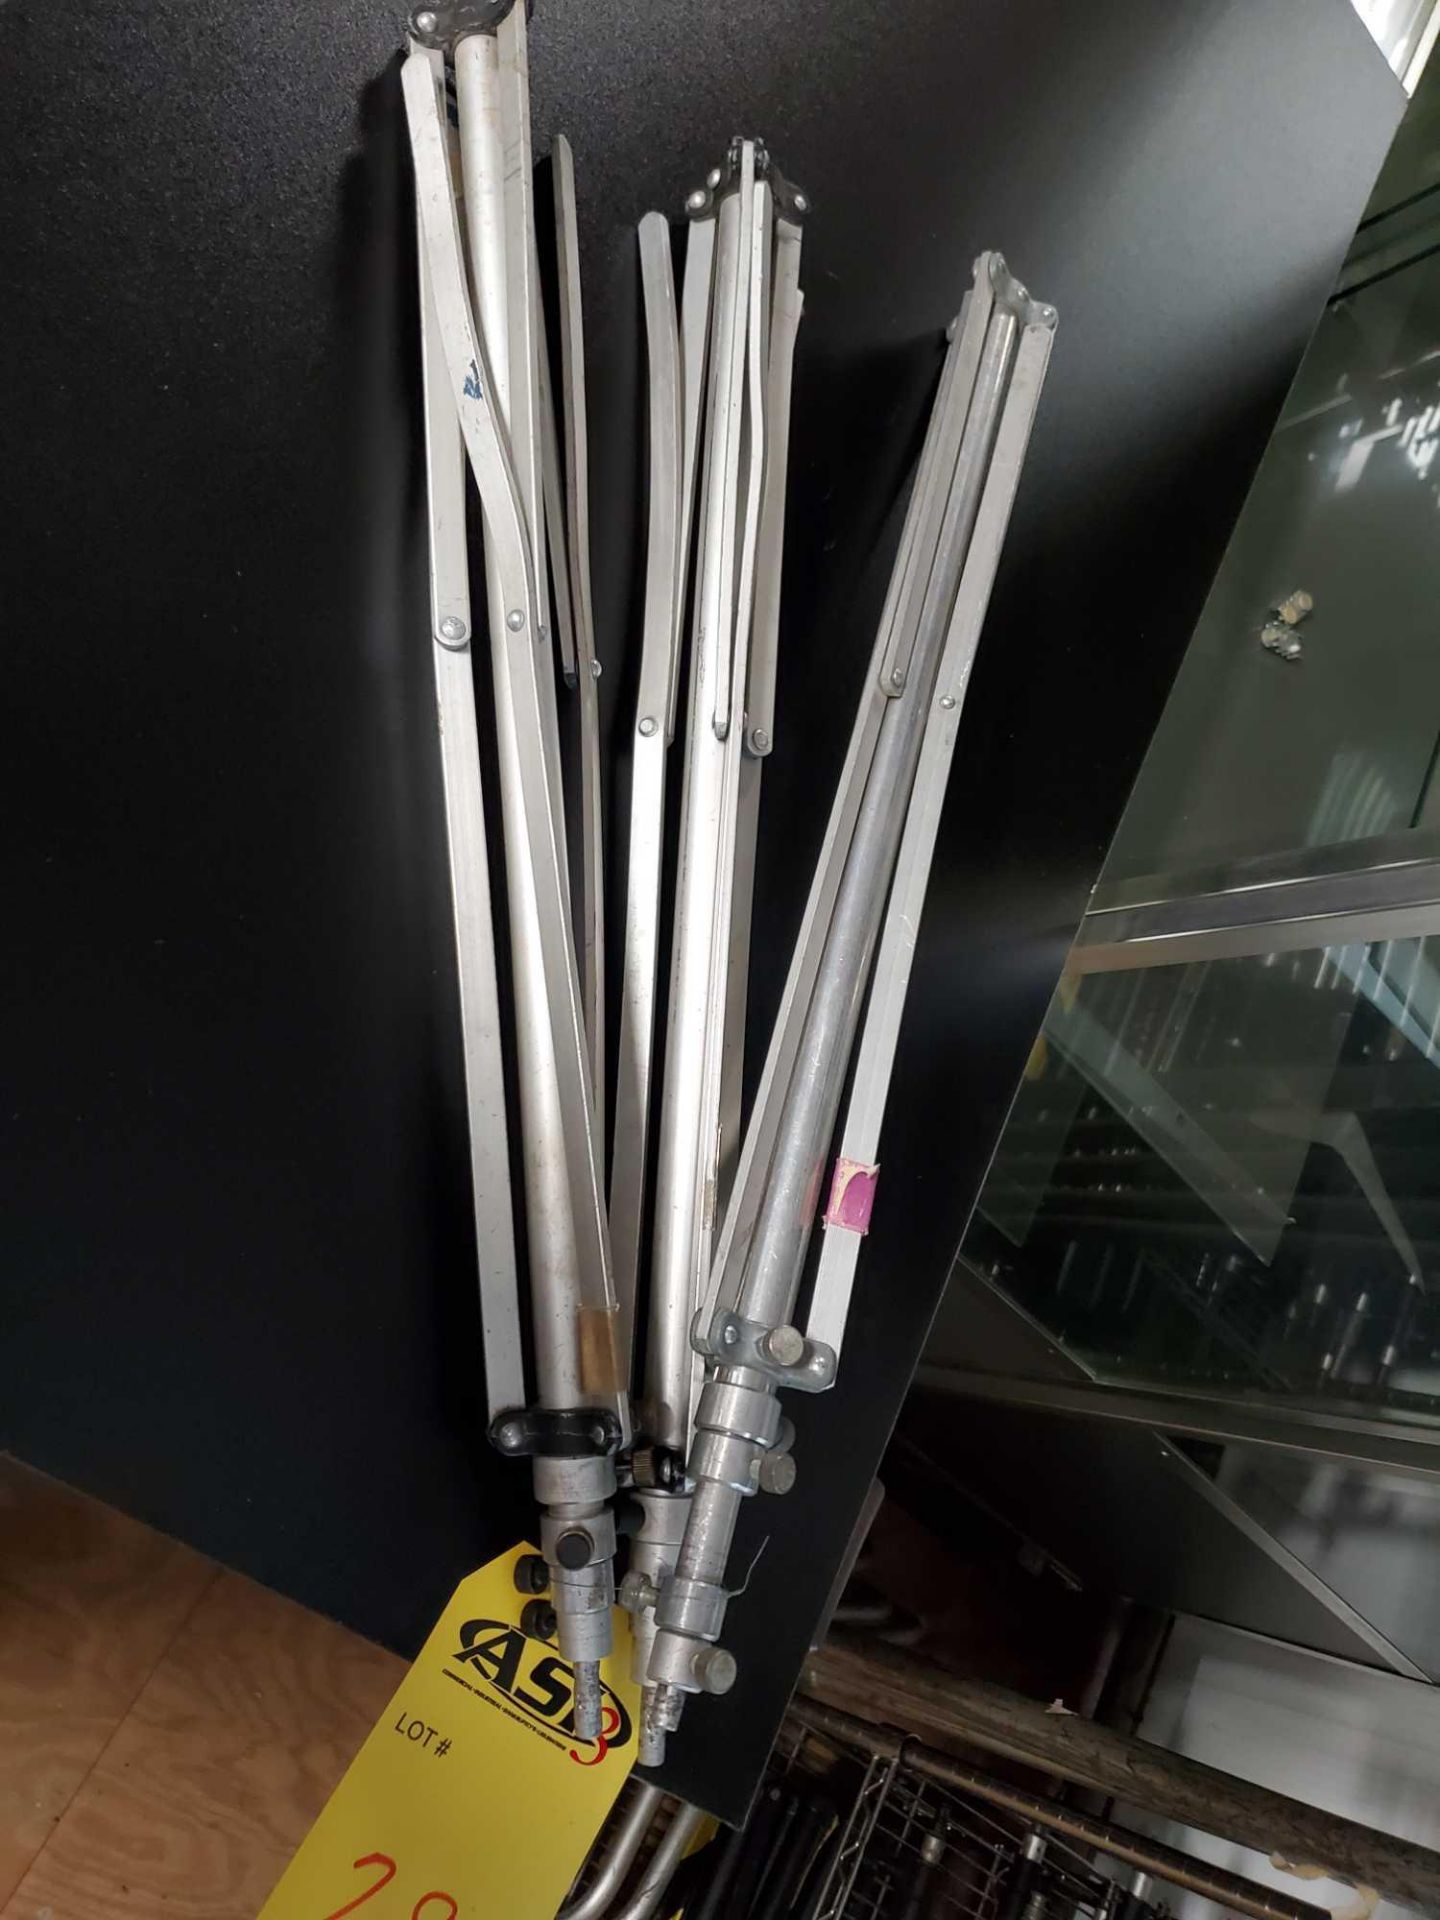 LOT OF 3 PROFESSIONAL LIGHTING TRIPOD STANDS - Image 3 of 3